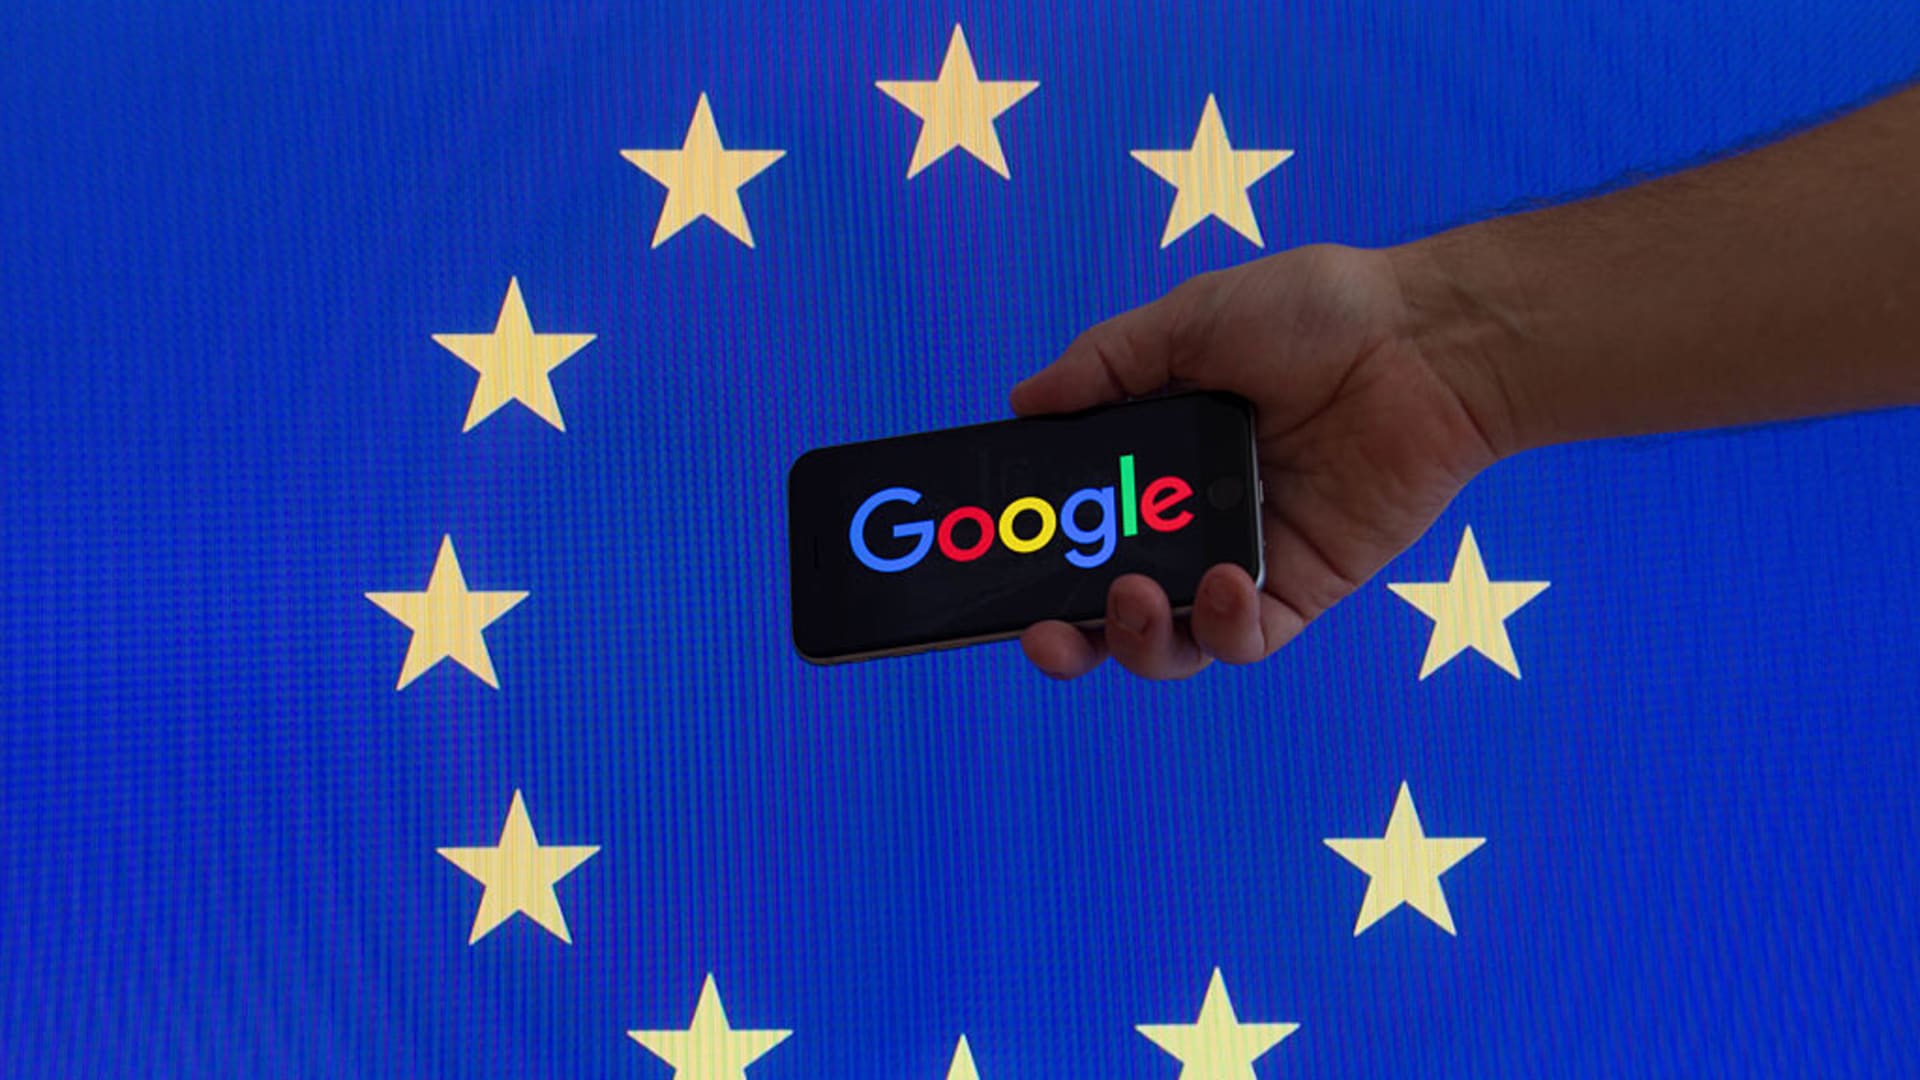 The European Union flag is seen with Google's logo.